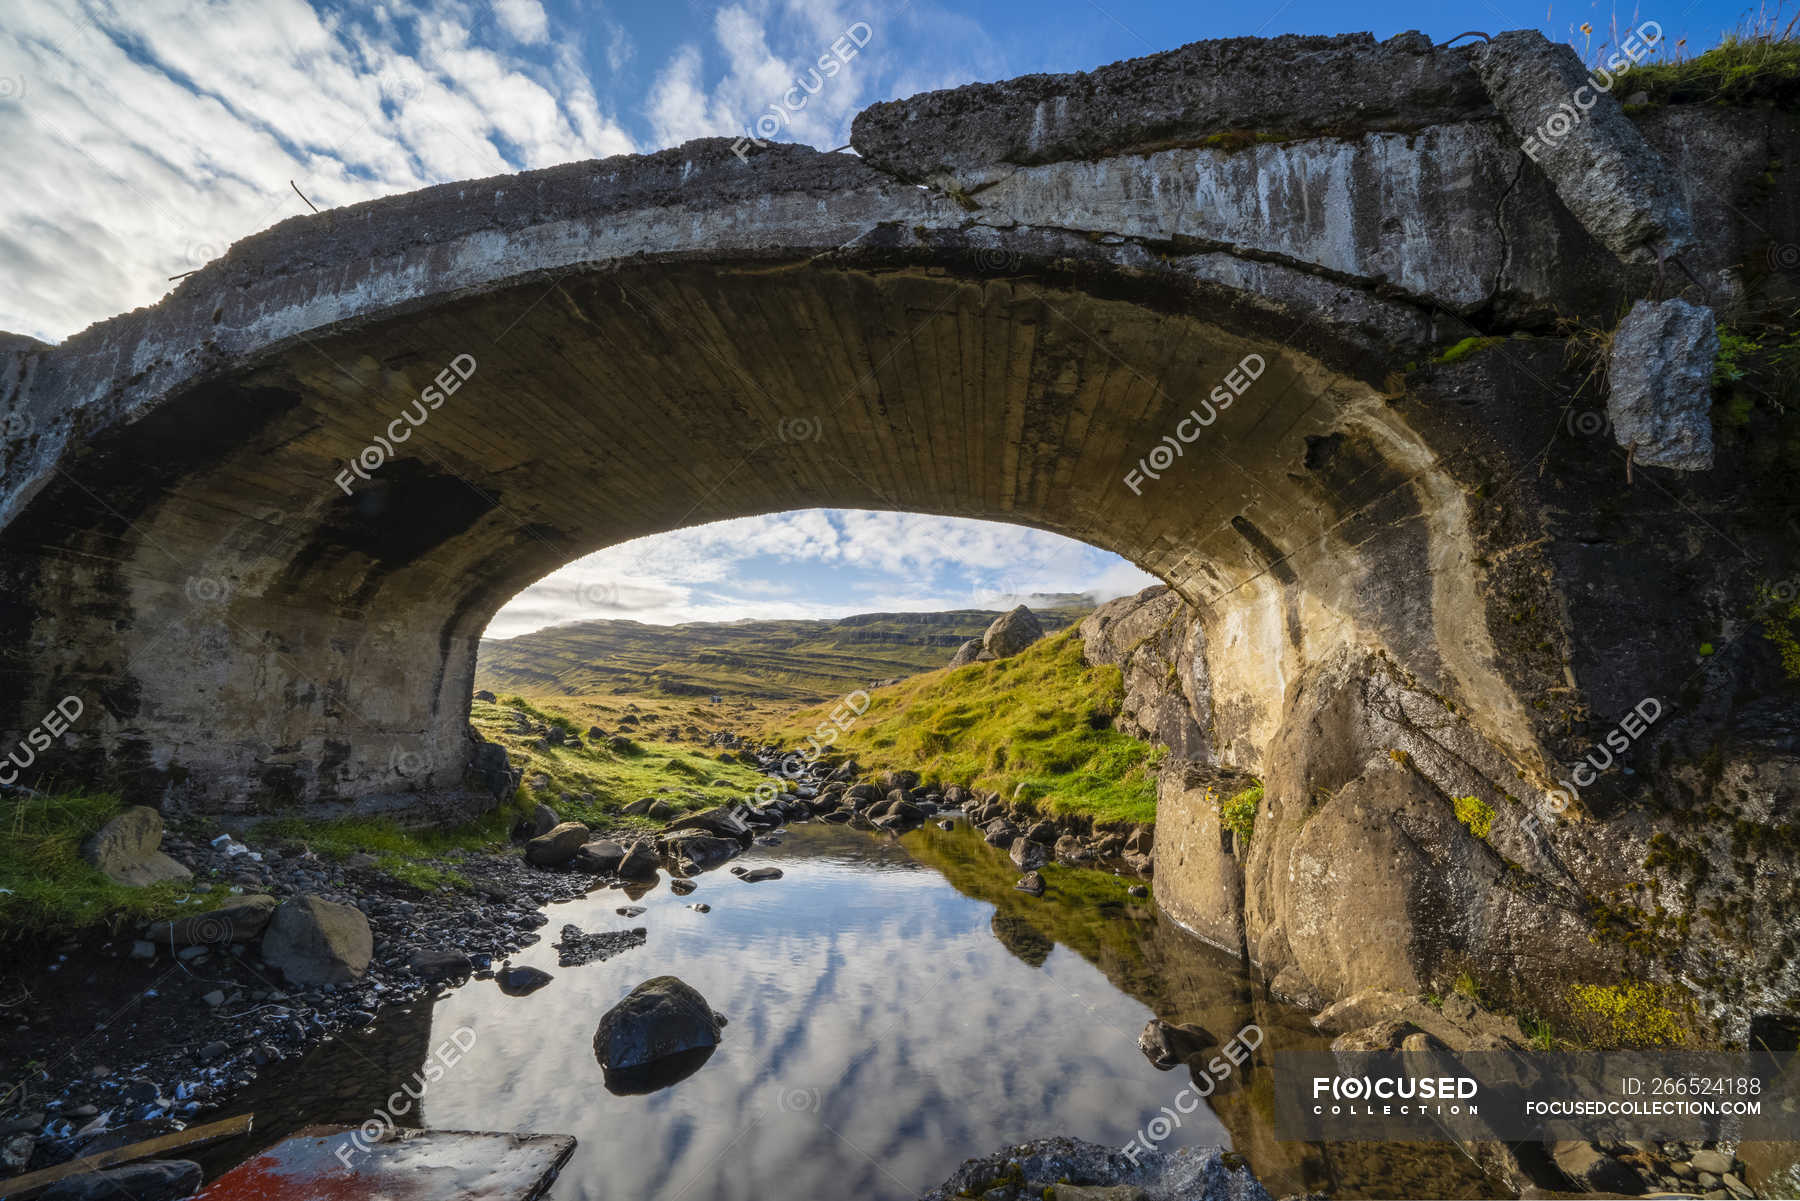 Regeneration tempo Stolpe Old bridge along the East coast of Iceland; East Fjords, Iceland — tourism,  building - Stock Photo | #266524188